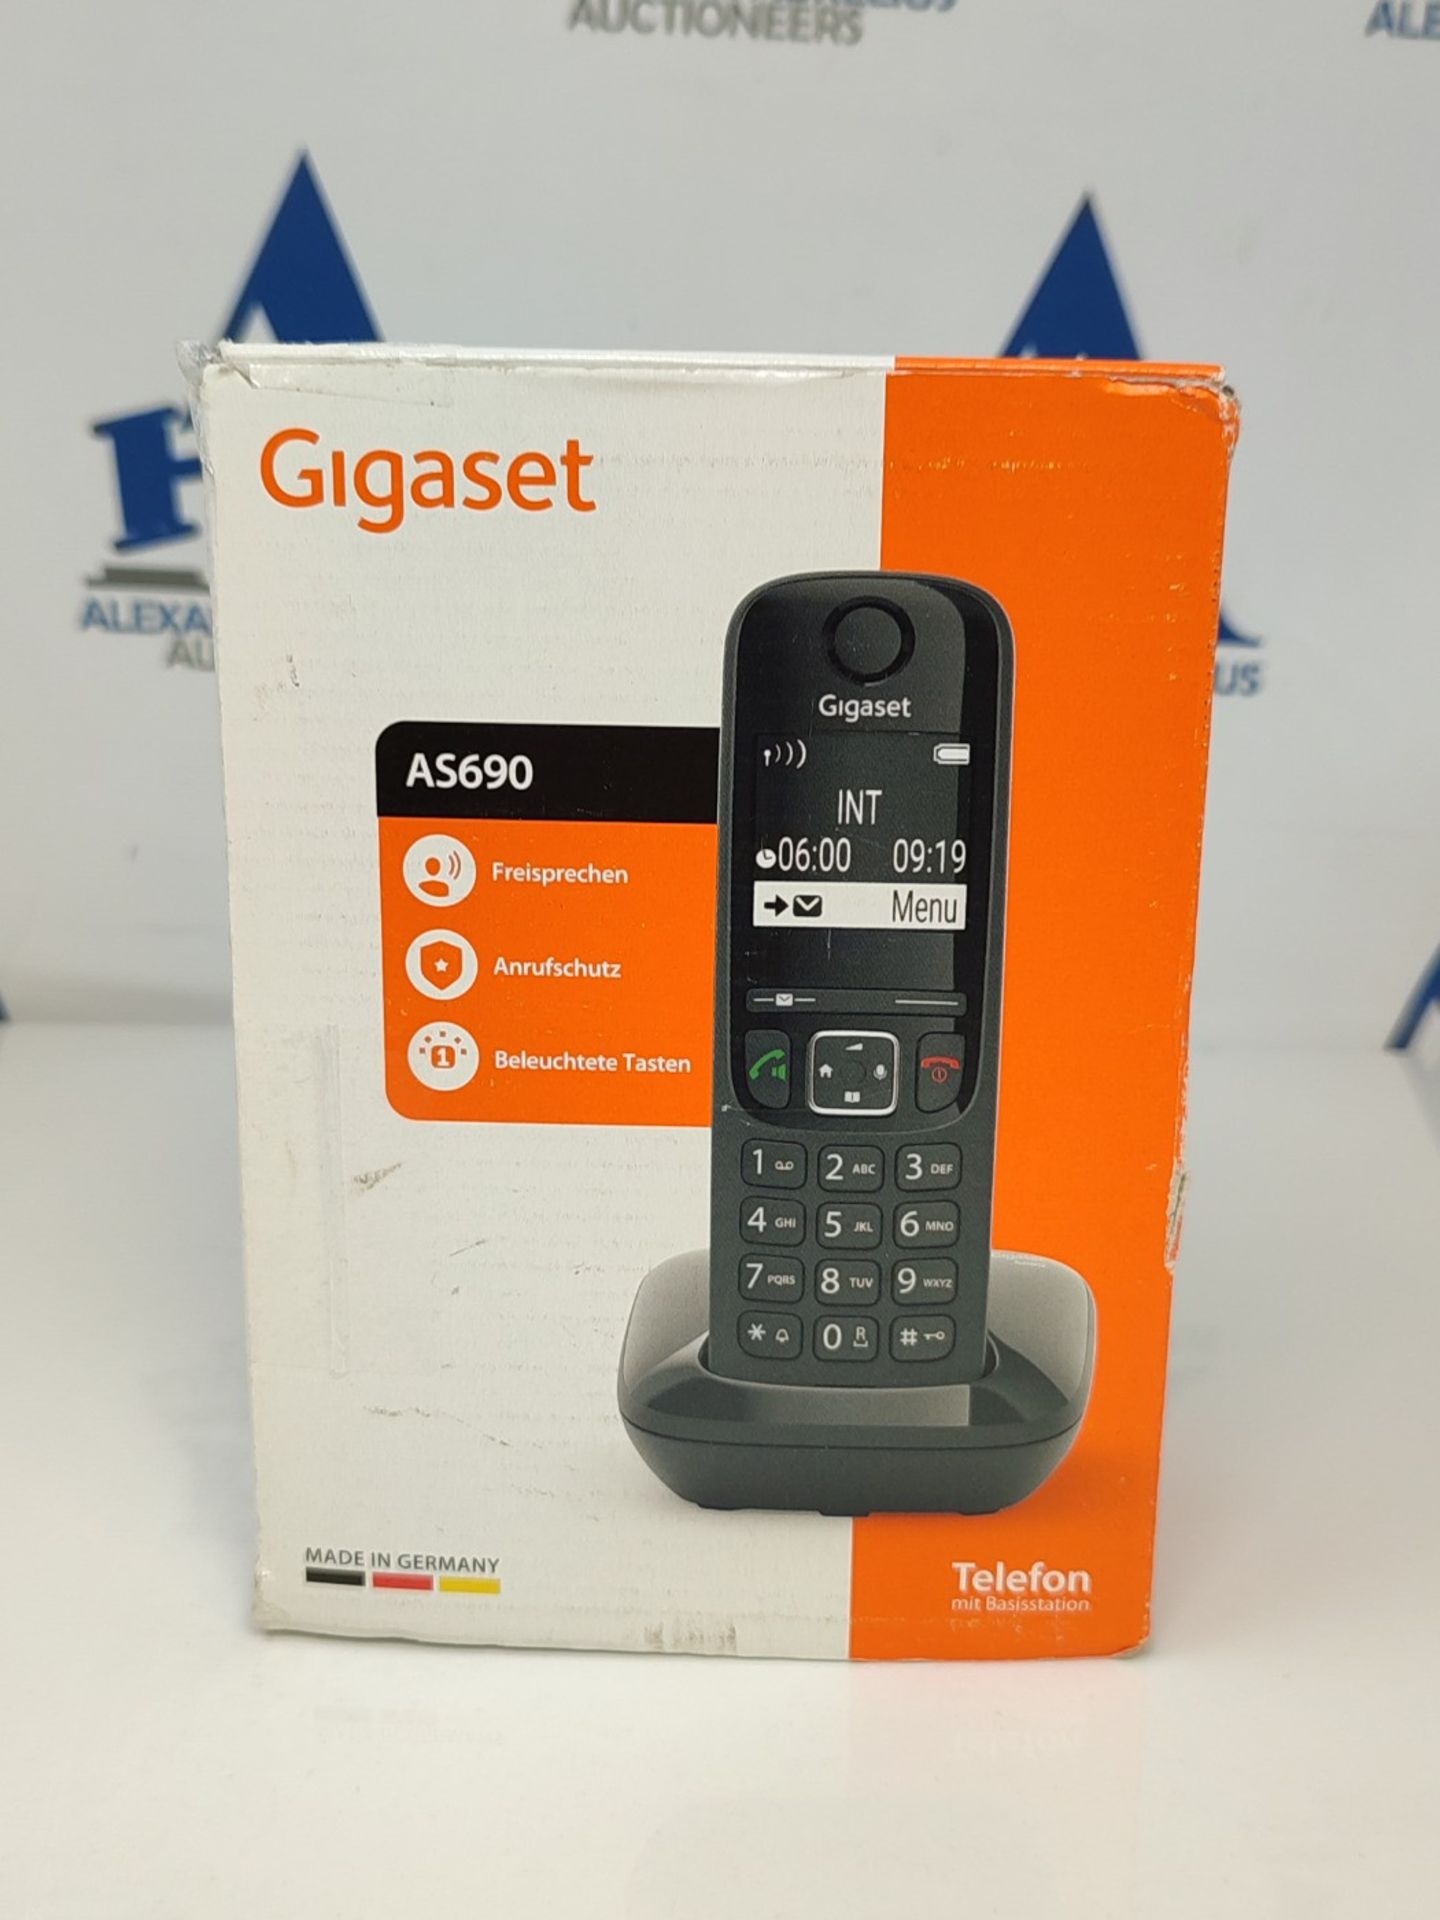 Gigaset AS690 - Cordless DECT Telephone - large, high-contrast display - brilliant aud - Image 5 of 6